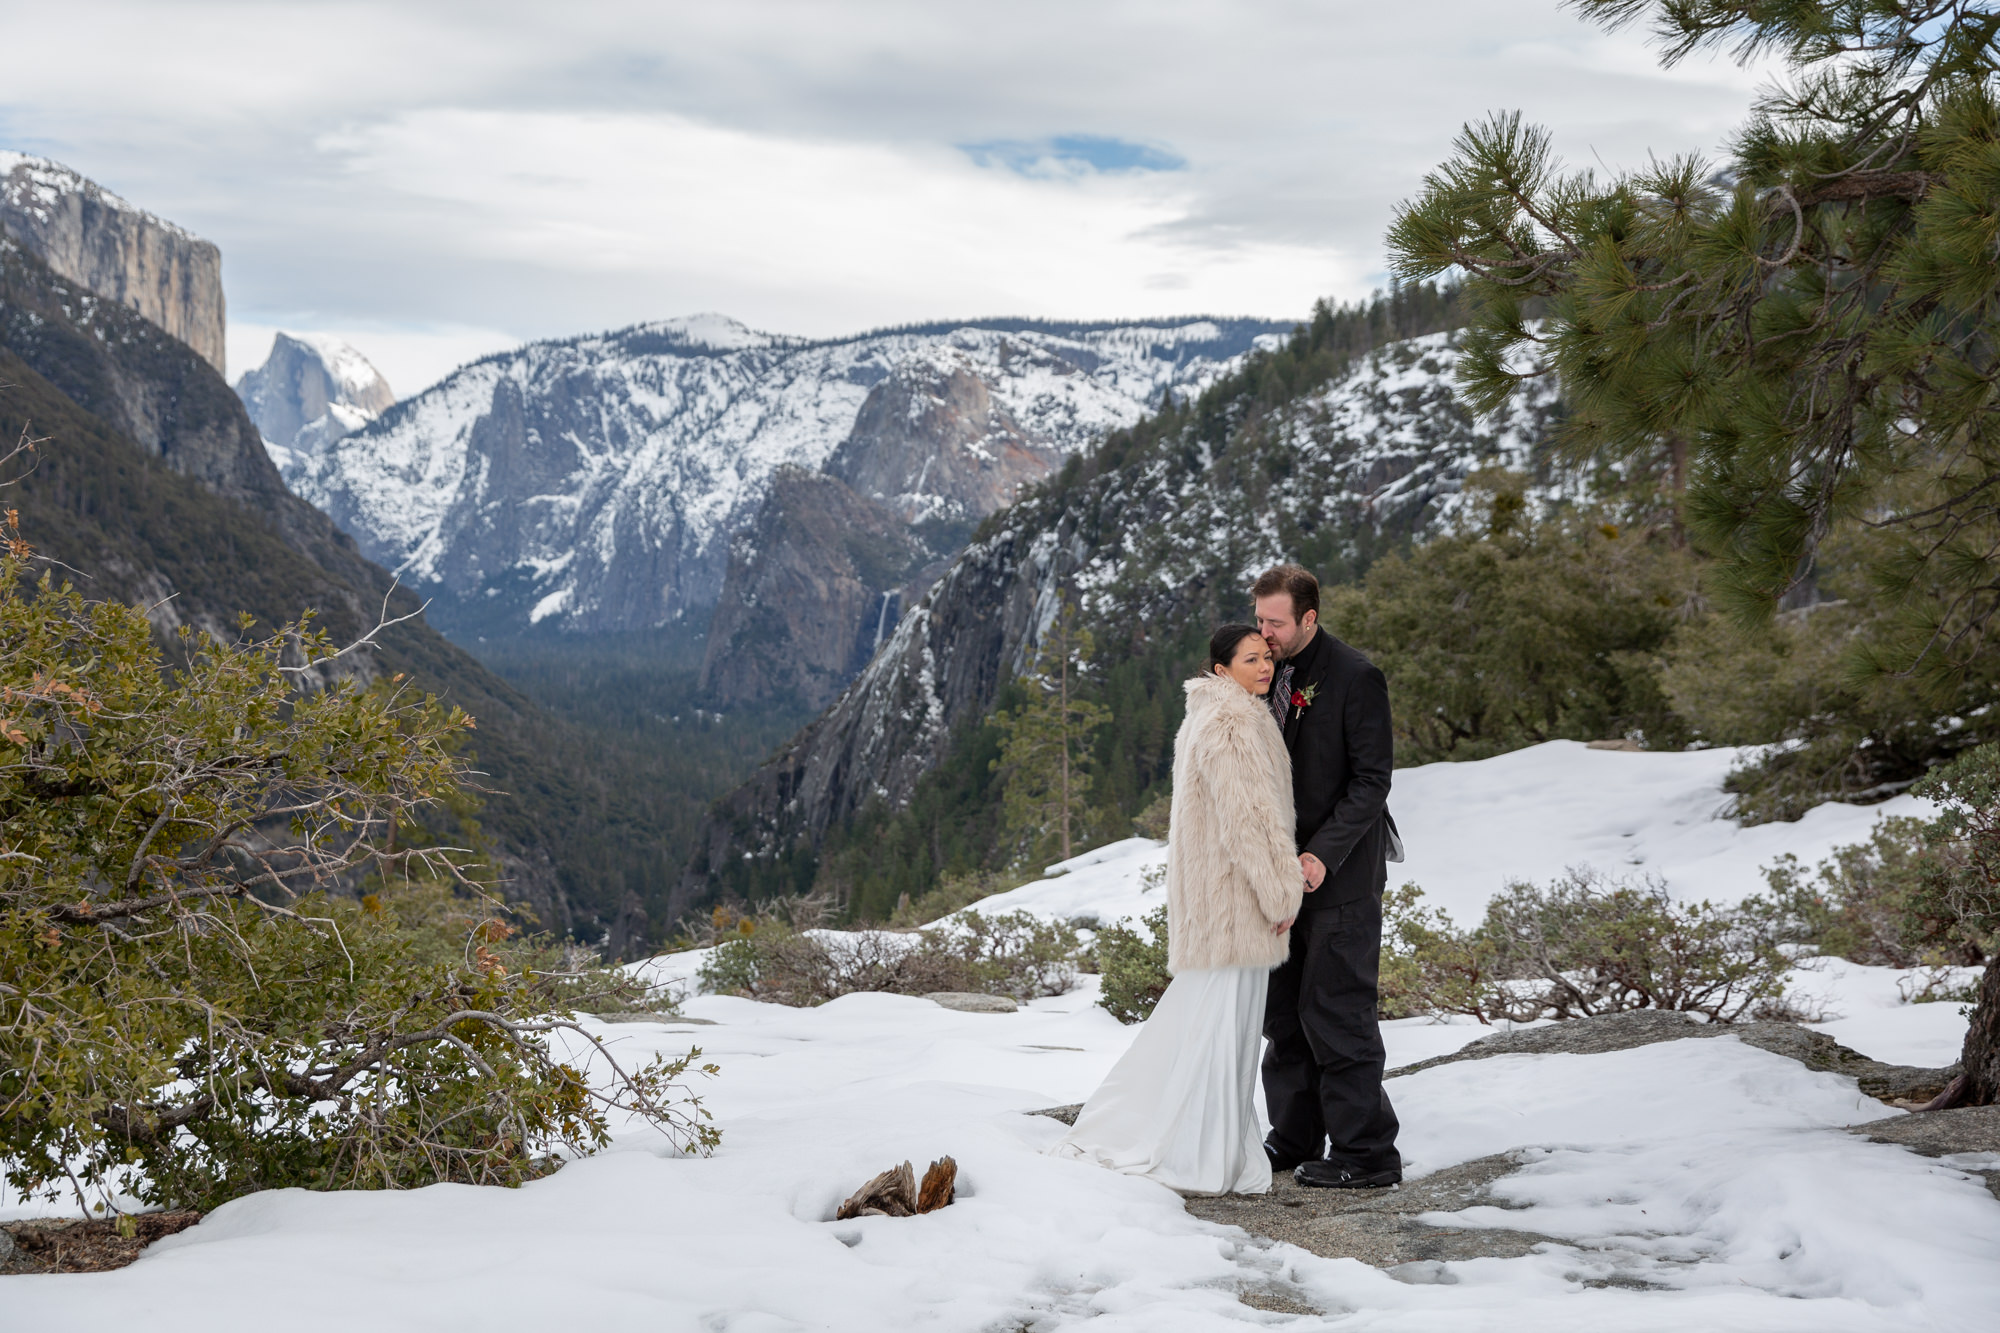 A bride in white dress and white fur coat leans against her groom smiling after they decided to have an elopement versus a wedding in Yosemite.